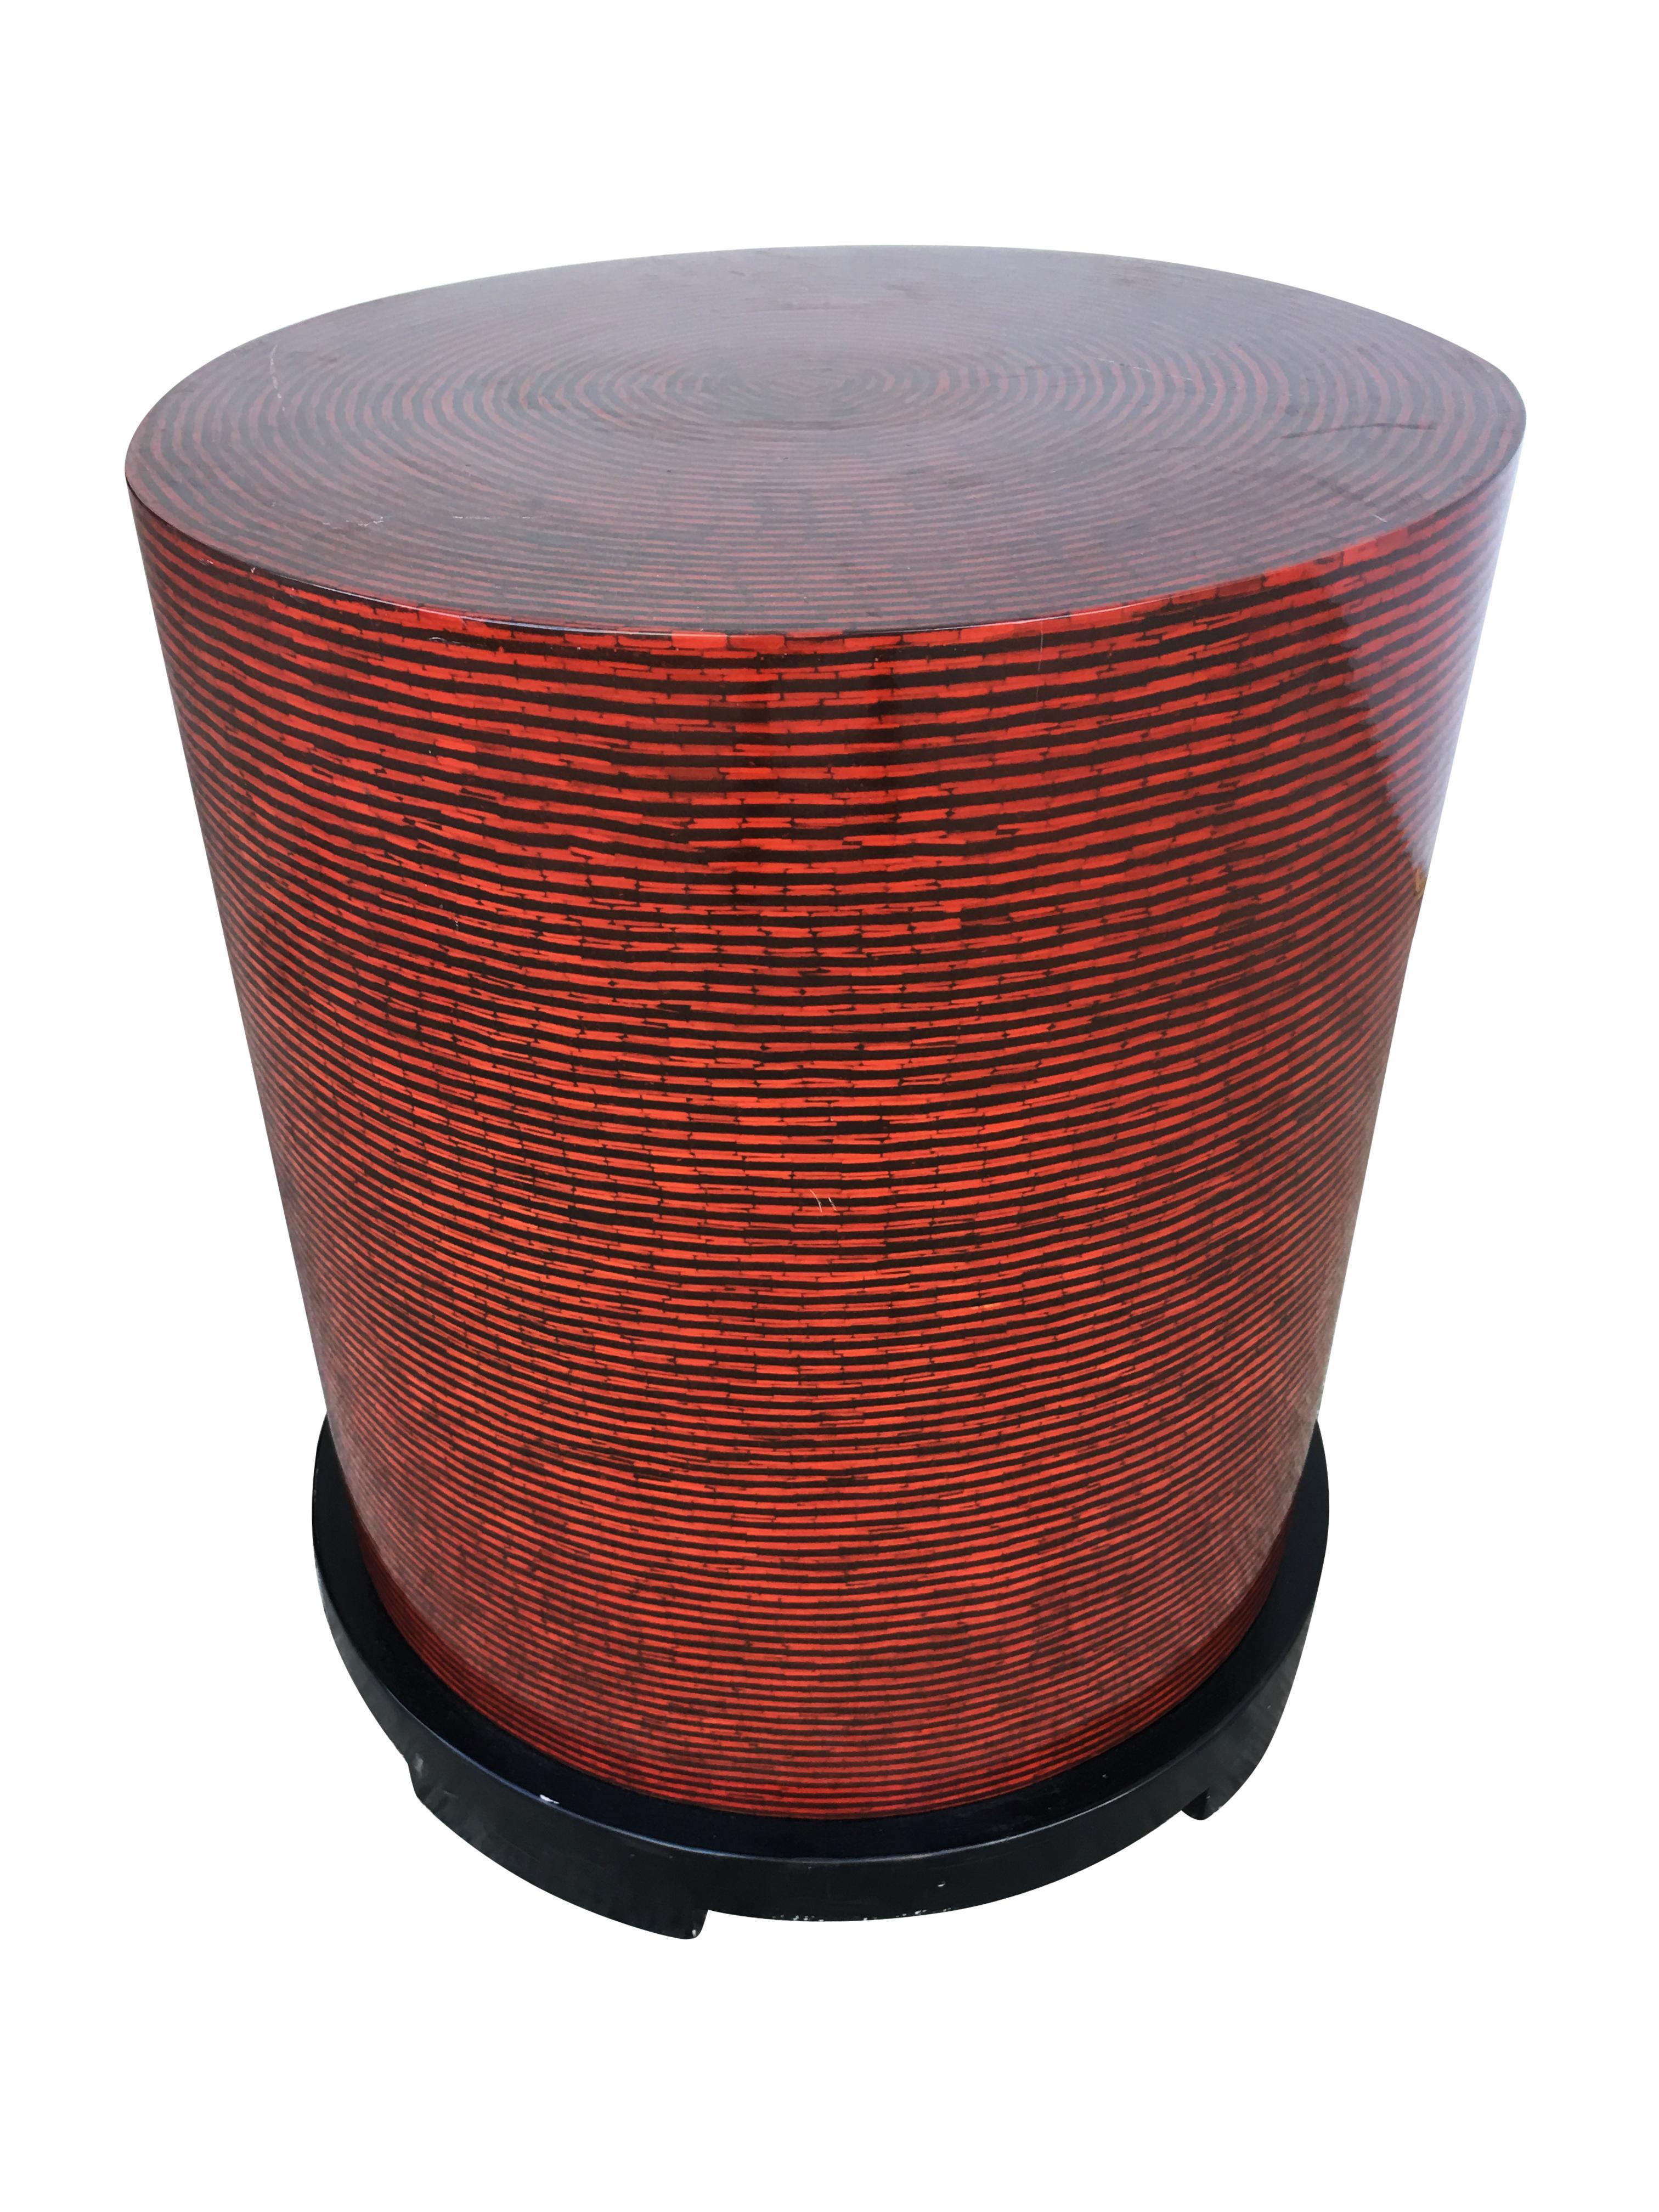 Pair of Two-tone Cubist Style round side table with red and tan textured vinyl tops.